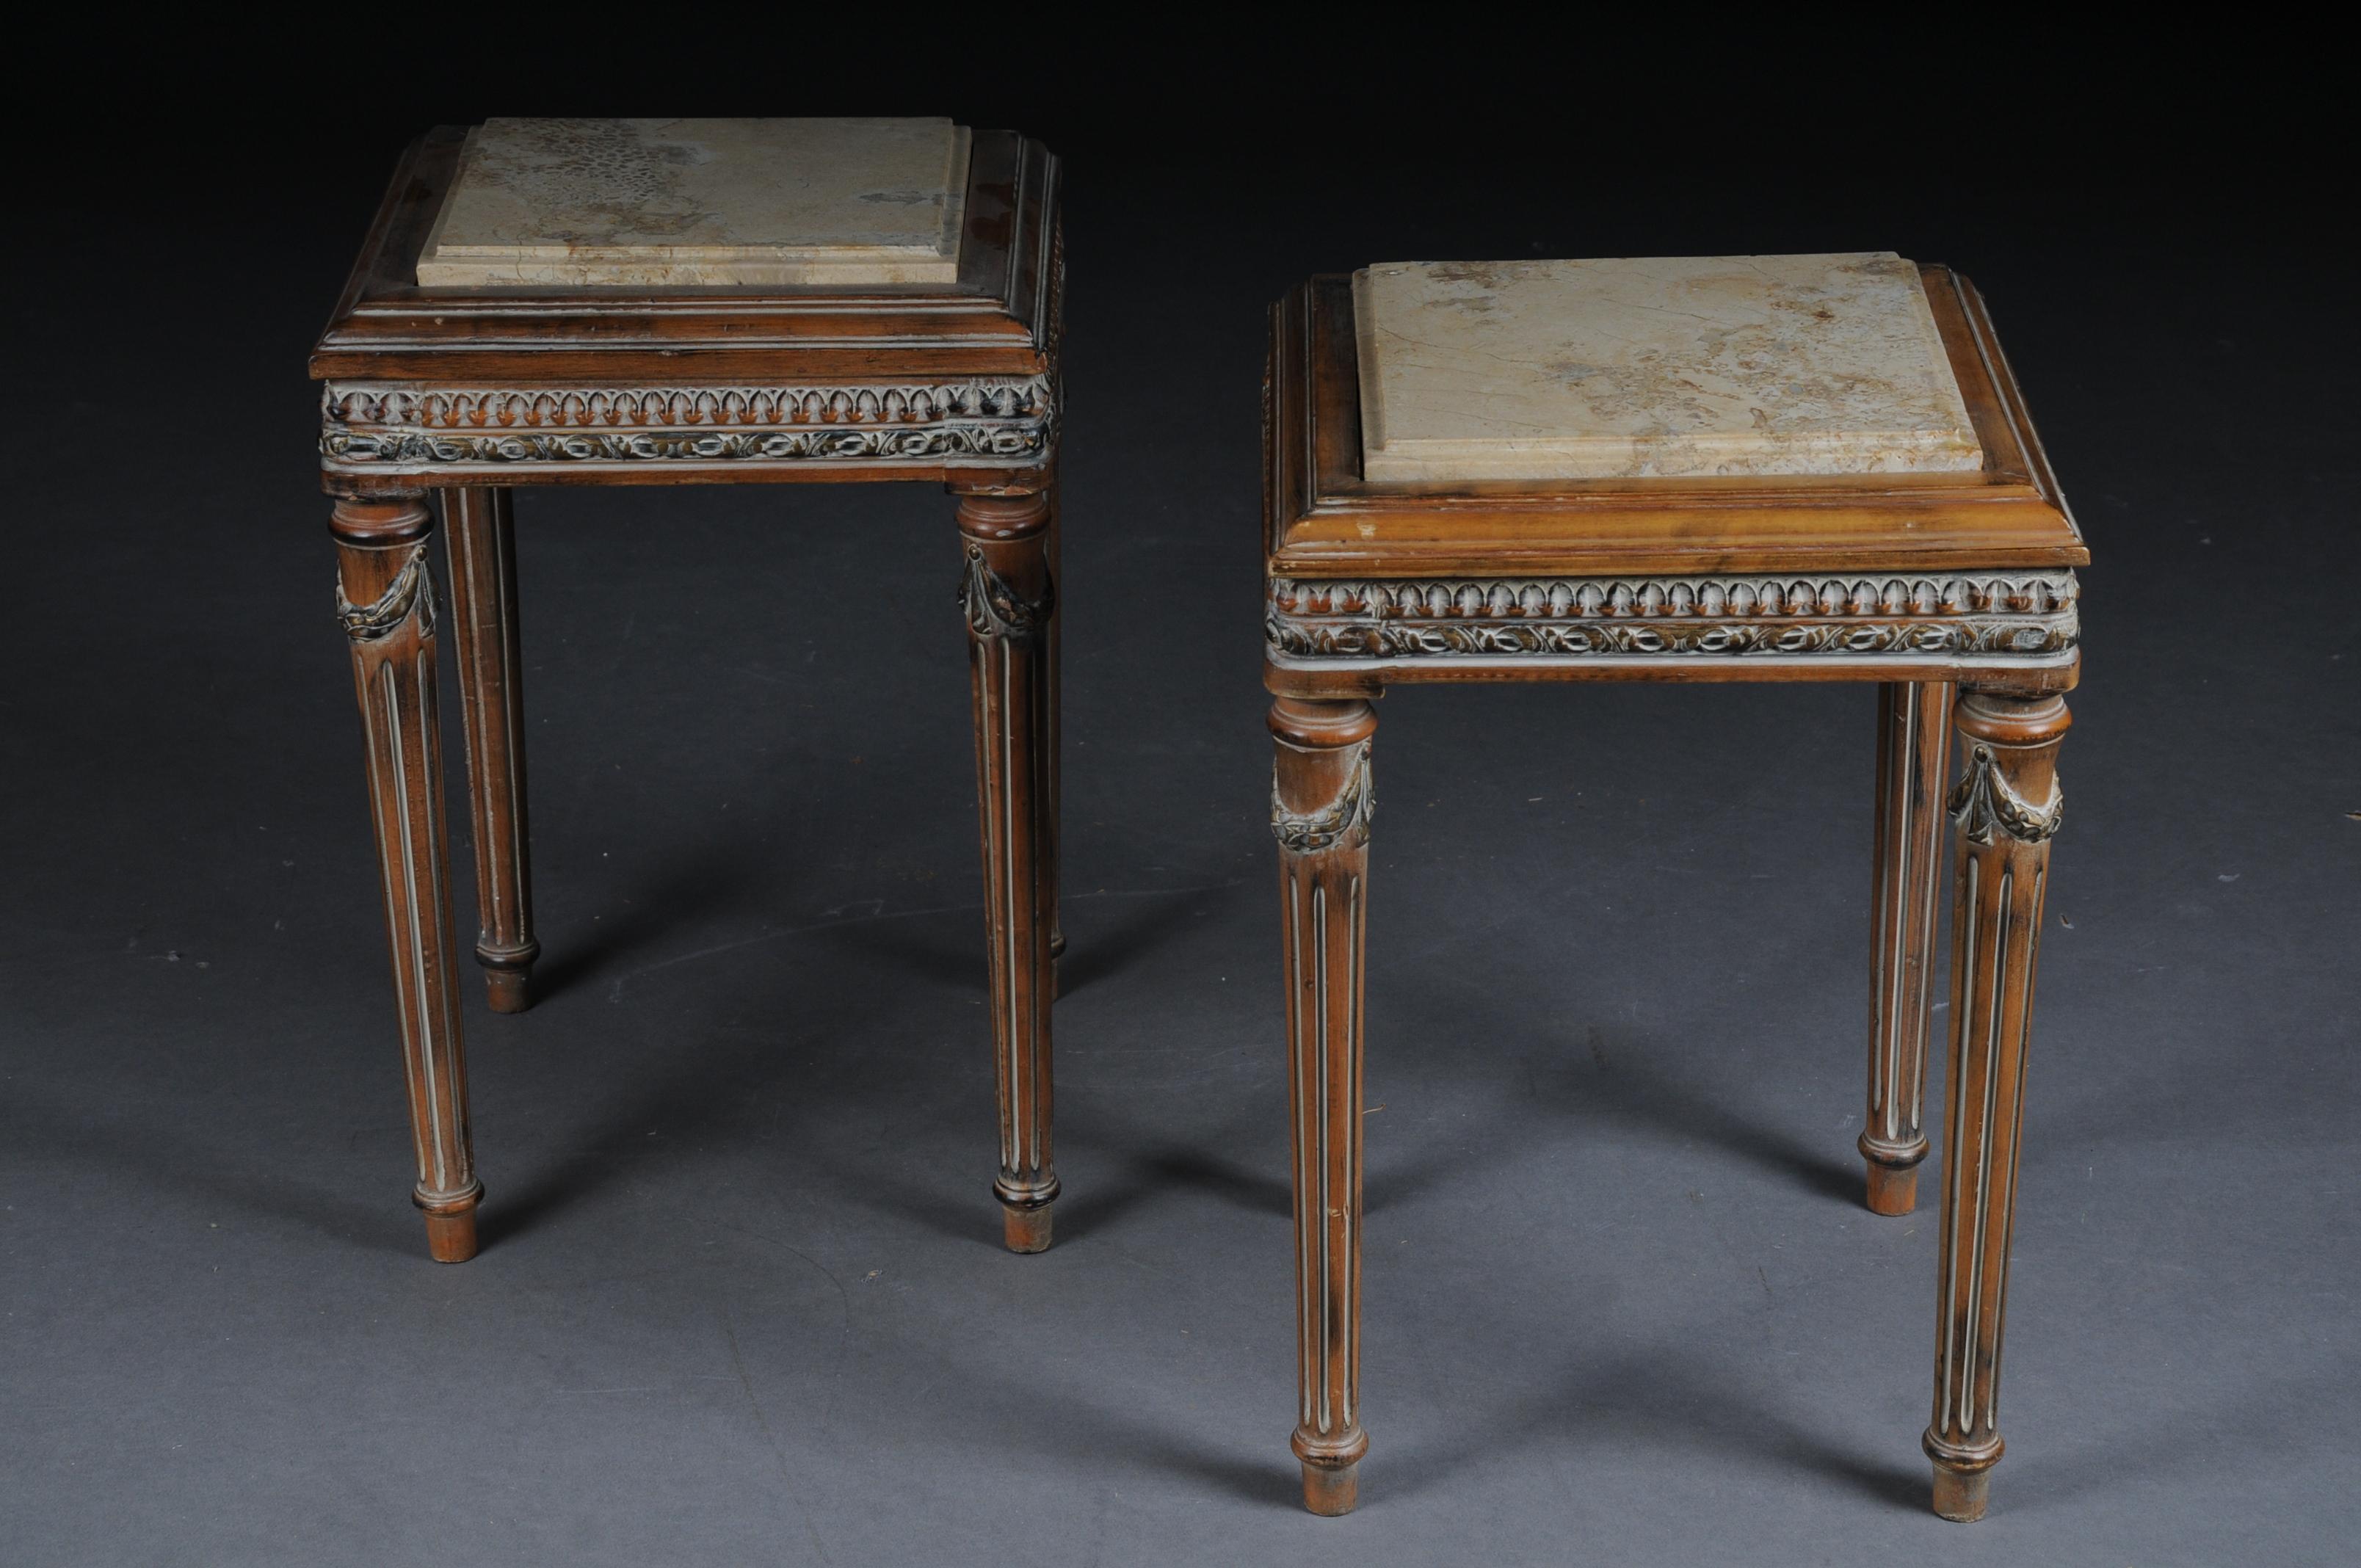 A Pair (2) 20th century Louis XV style French side table.

Excellent French table in Louis XVI style.
Highly valuable solid beechwood carved to the finest detail. Colored inlays.

(G-99).